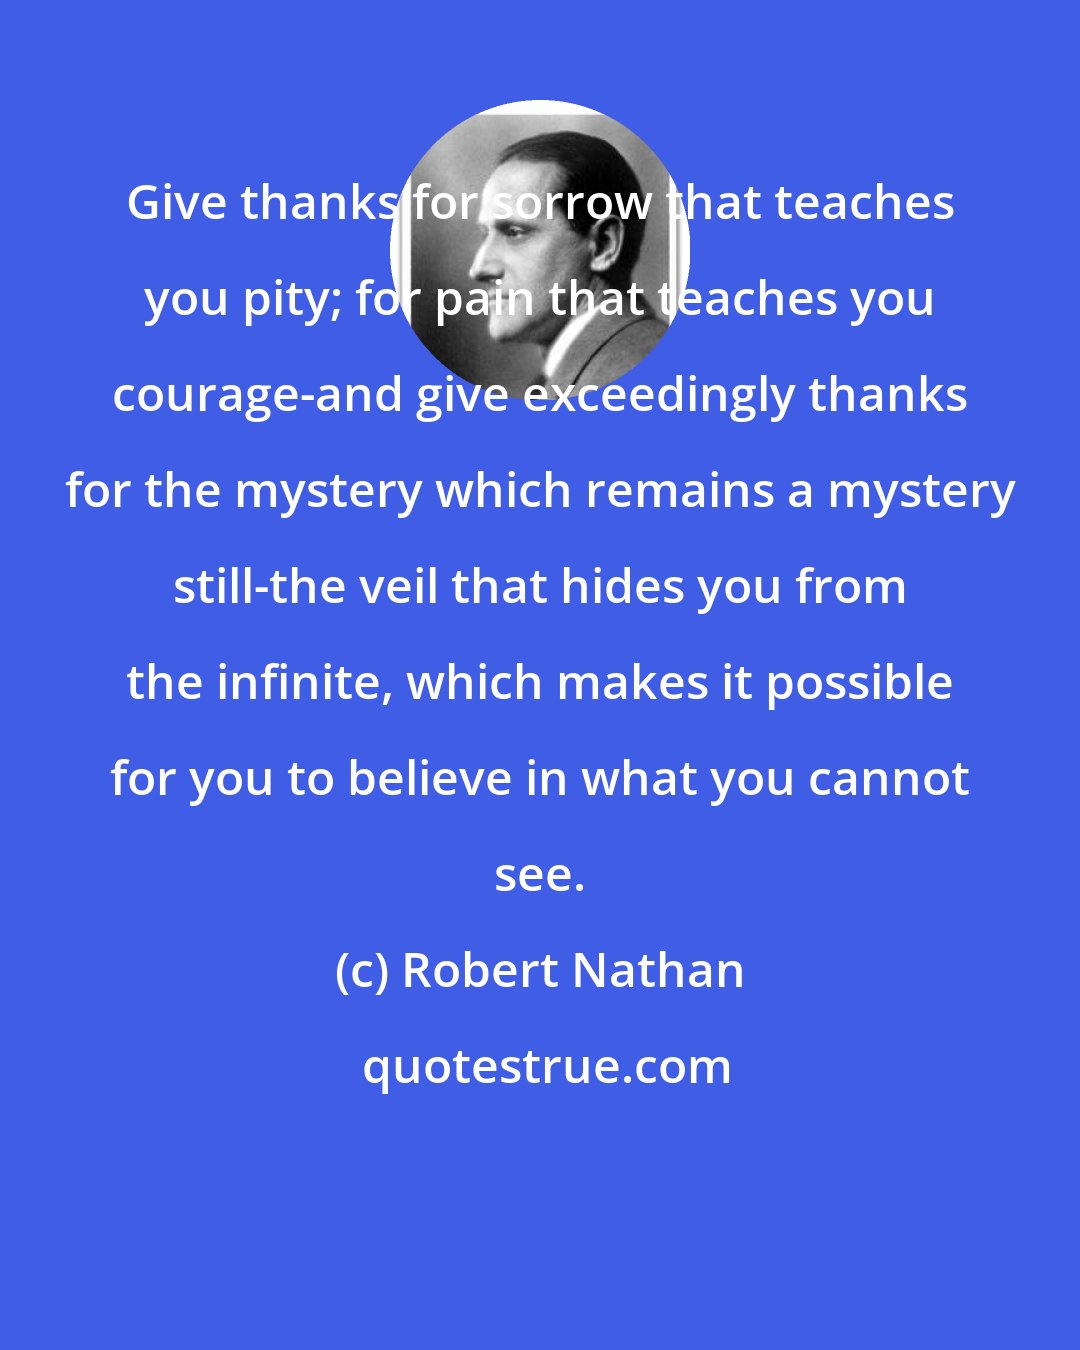 Robert Nathan: Give thanks for sorrow that teaches you pity; for pain that teaches you courage-and give exceedingly thanks for the mystery which remains a mystery still-the veil that hides you from the infinite, which makes it possible for you to believe in what you cannot see.